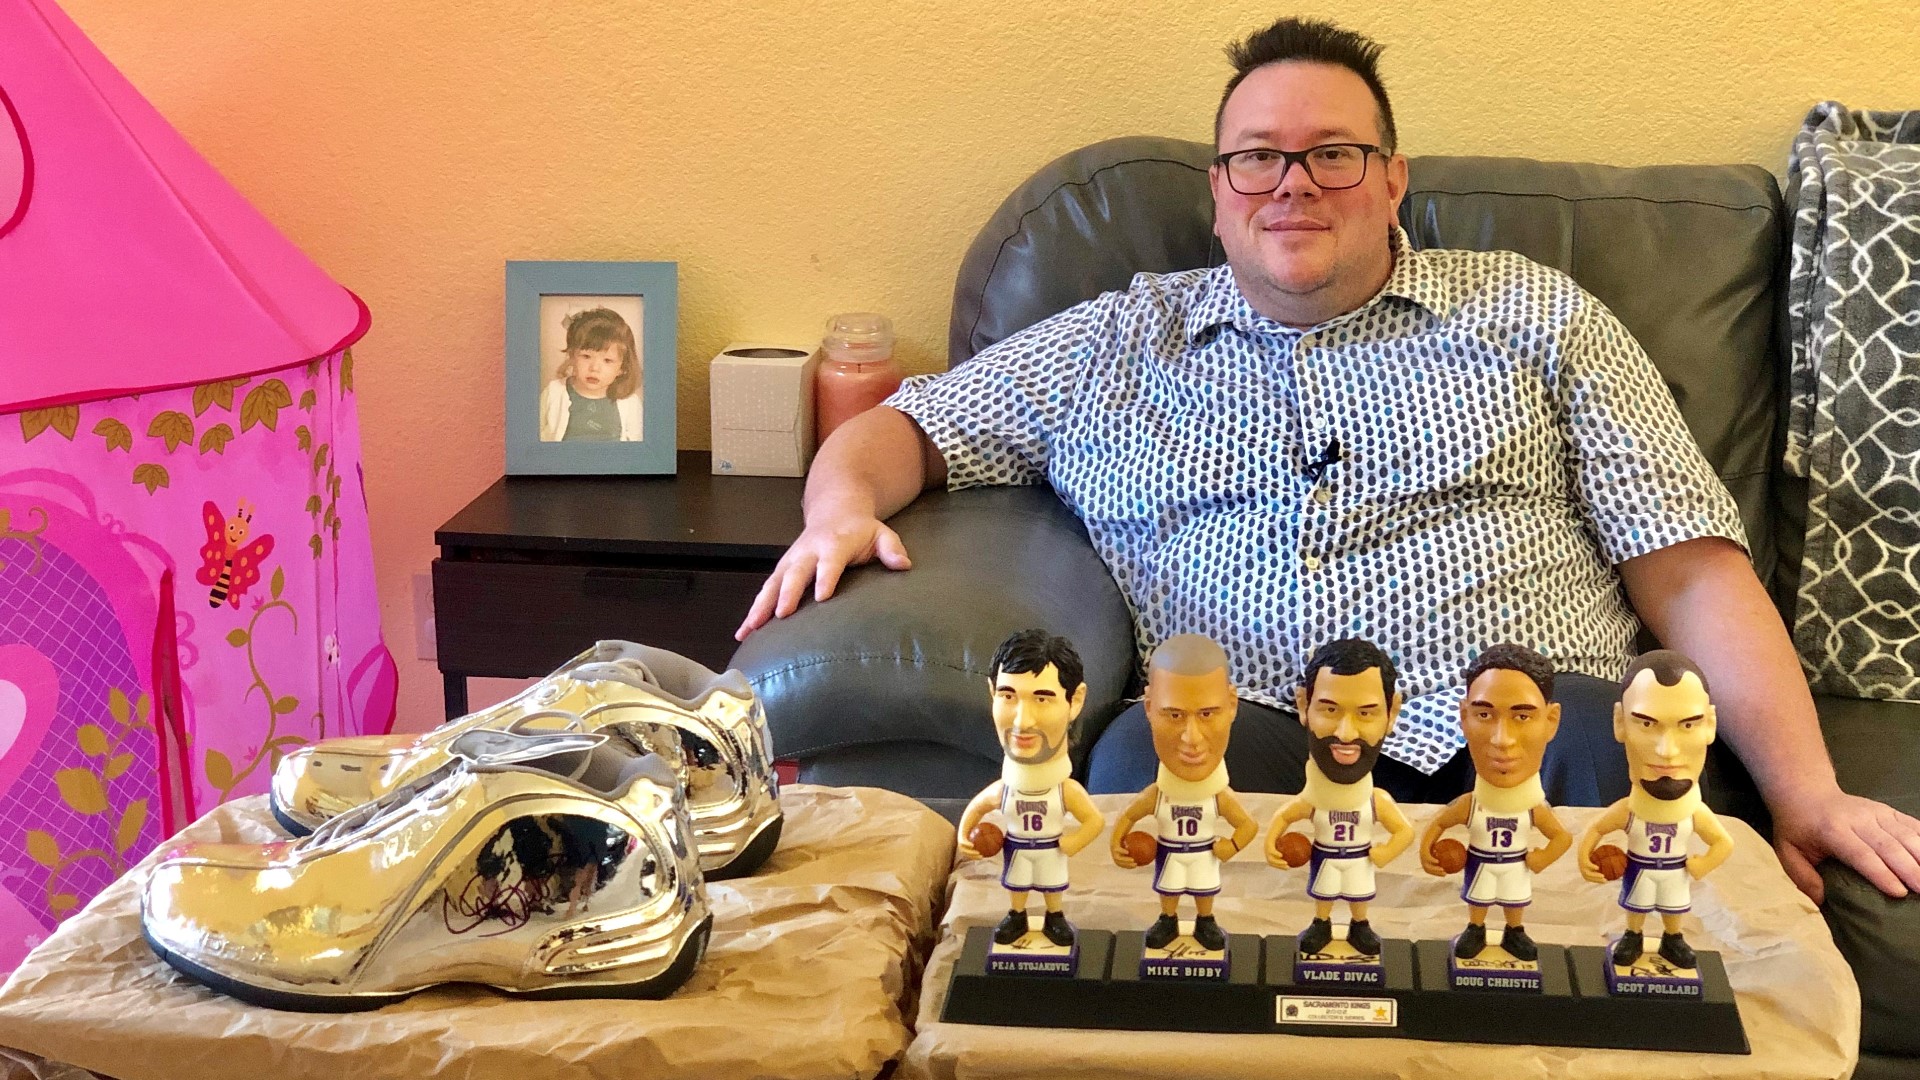 Joshua Noel from Elk Grove said his life changed after he was hit by a distracted driver. He suffers from severe spine pain that doesn't allow him to sit or stand for long periods of time. Now he is selling his collection of autographed sports and music memorabilia in hopes of paying for the stem cell treatment.